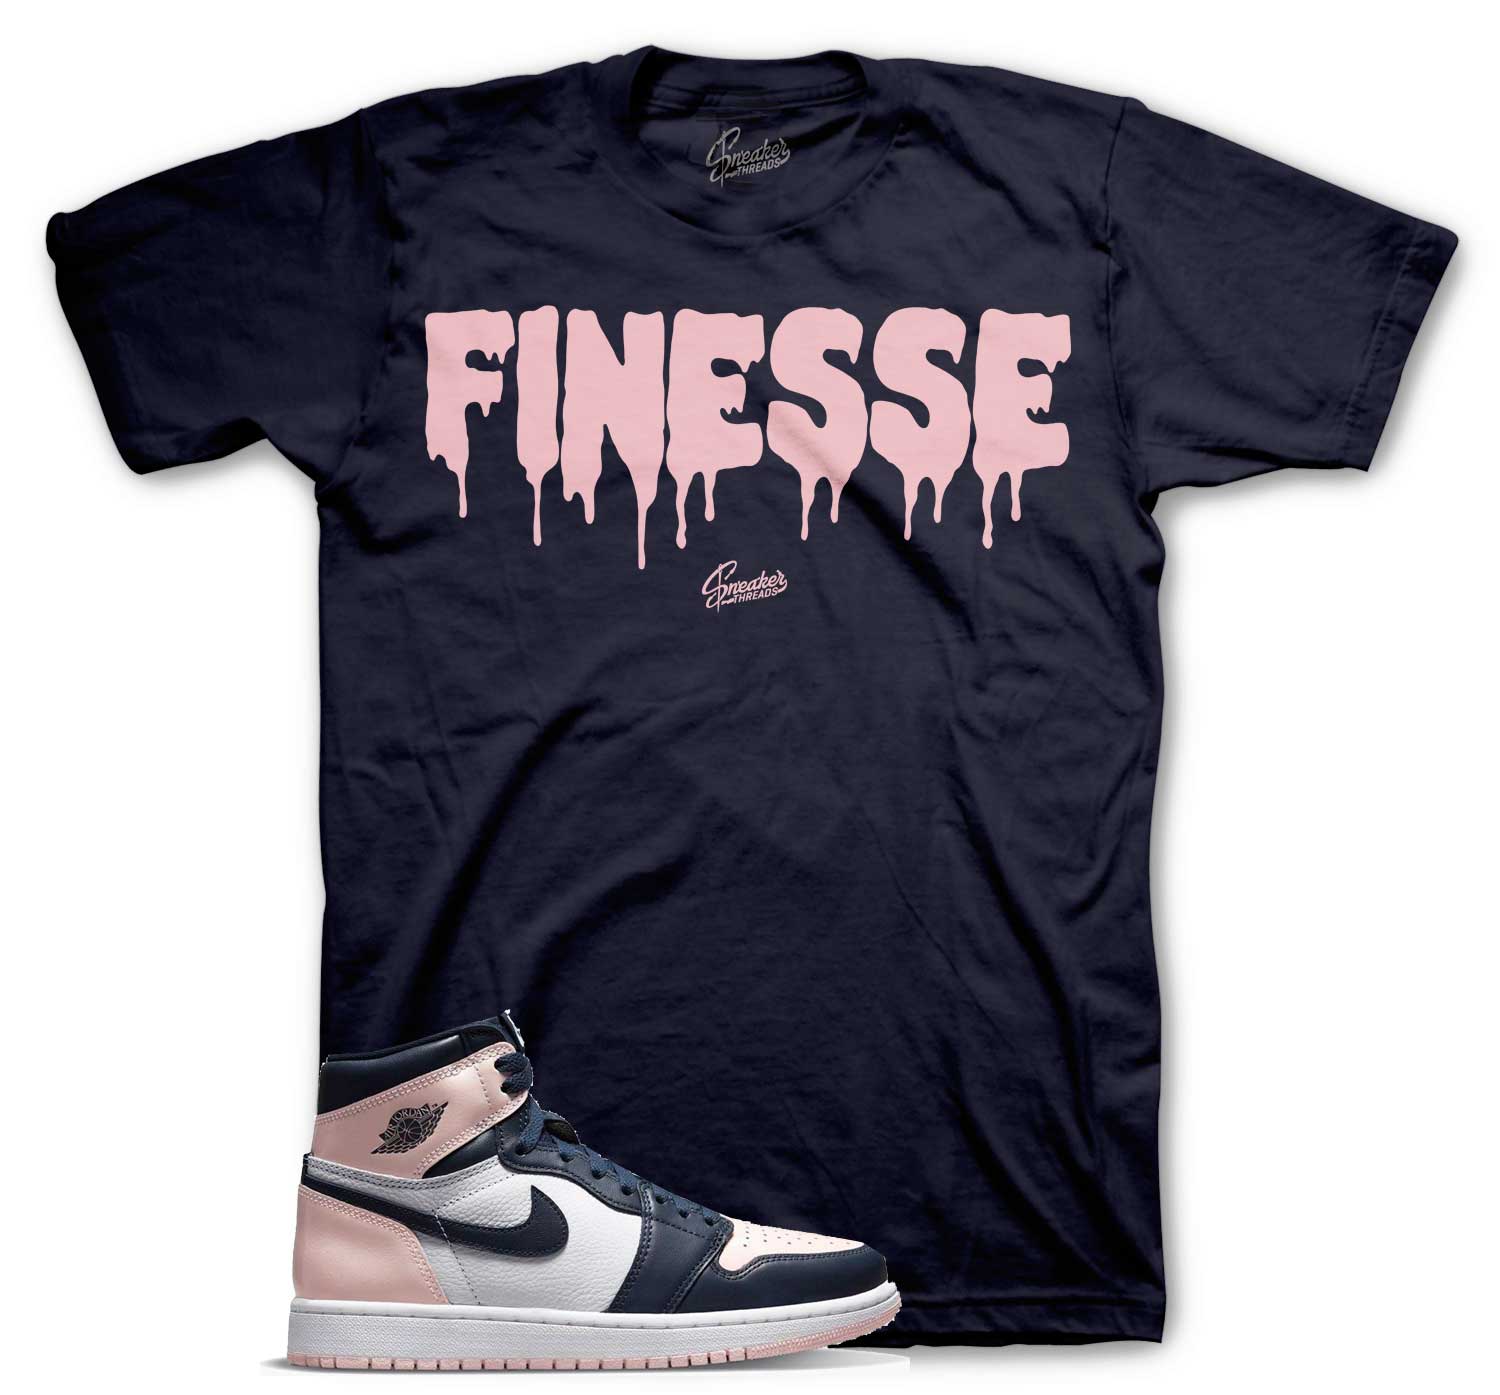 Retro 1 Atmosphere Pink Shirt - Finesse - Navy